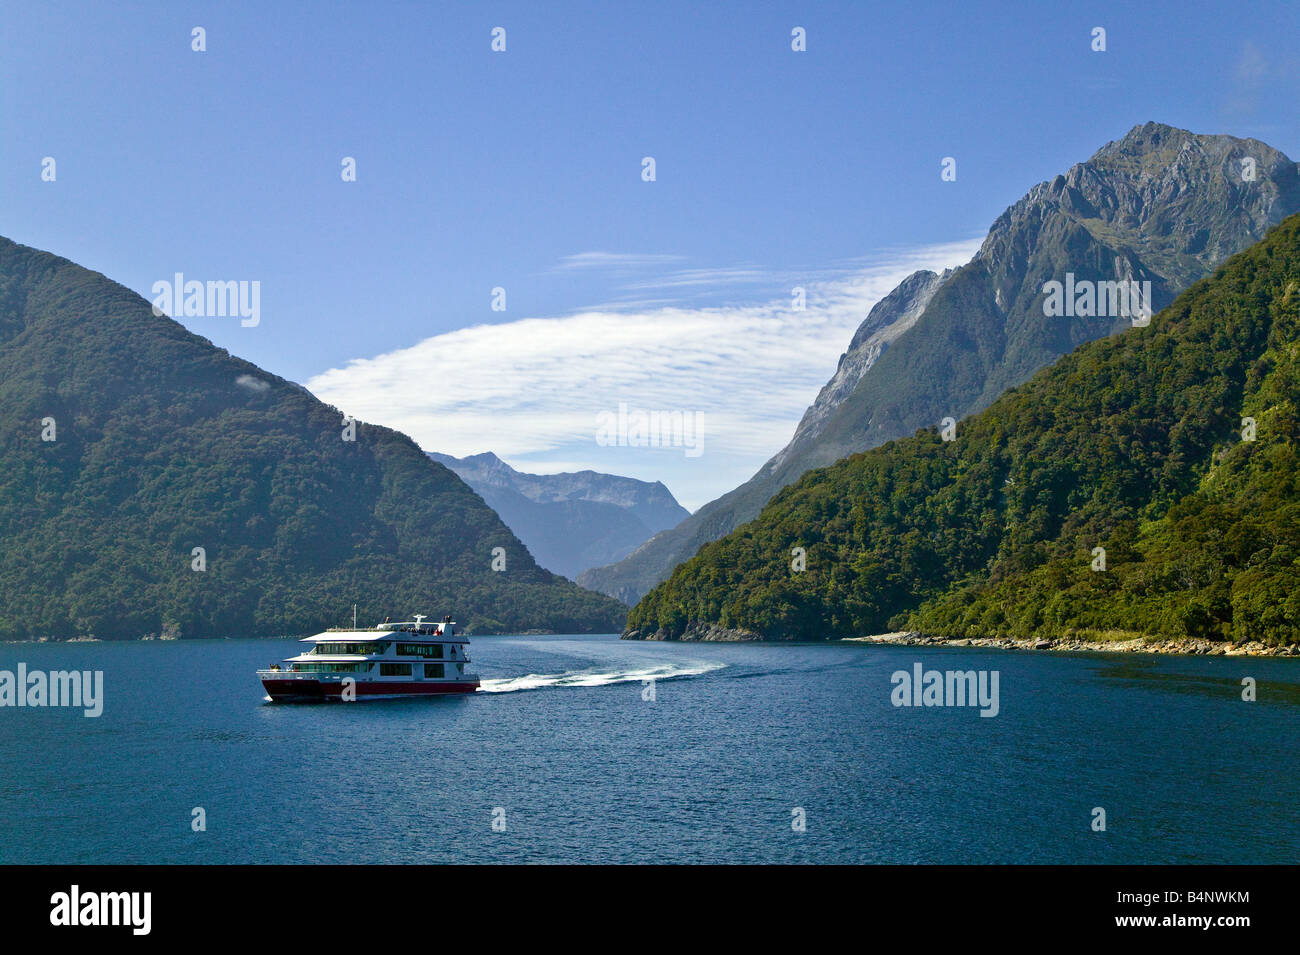 Sea entrance to Milford Sound, with a tourist boat in the foreground. South Island of New Zealand Stock Photo